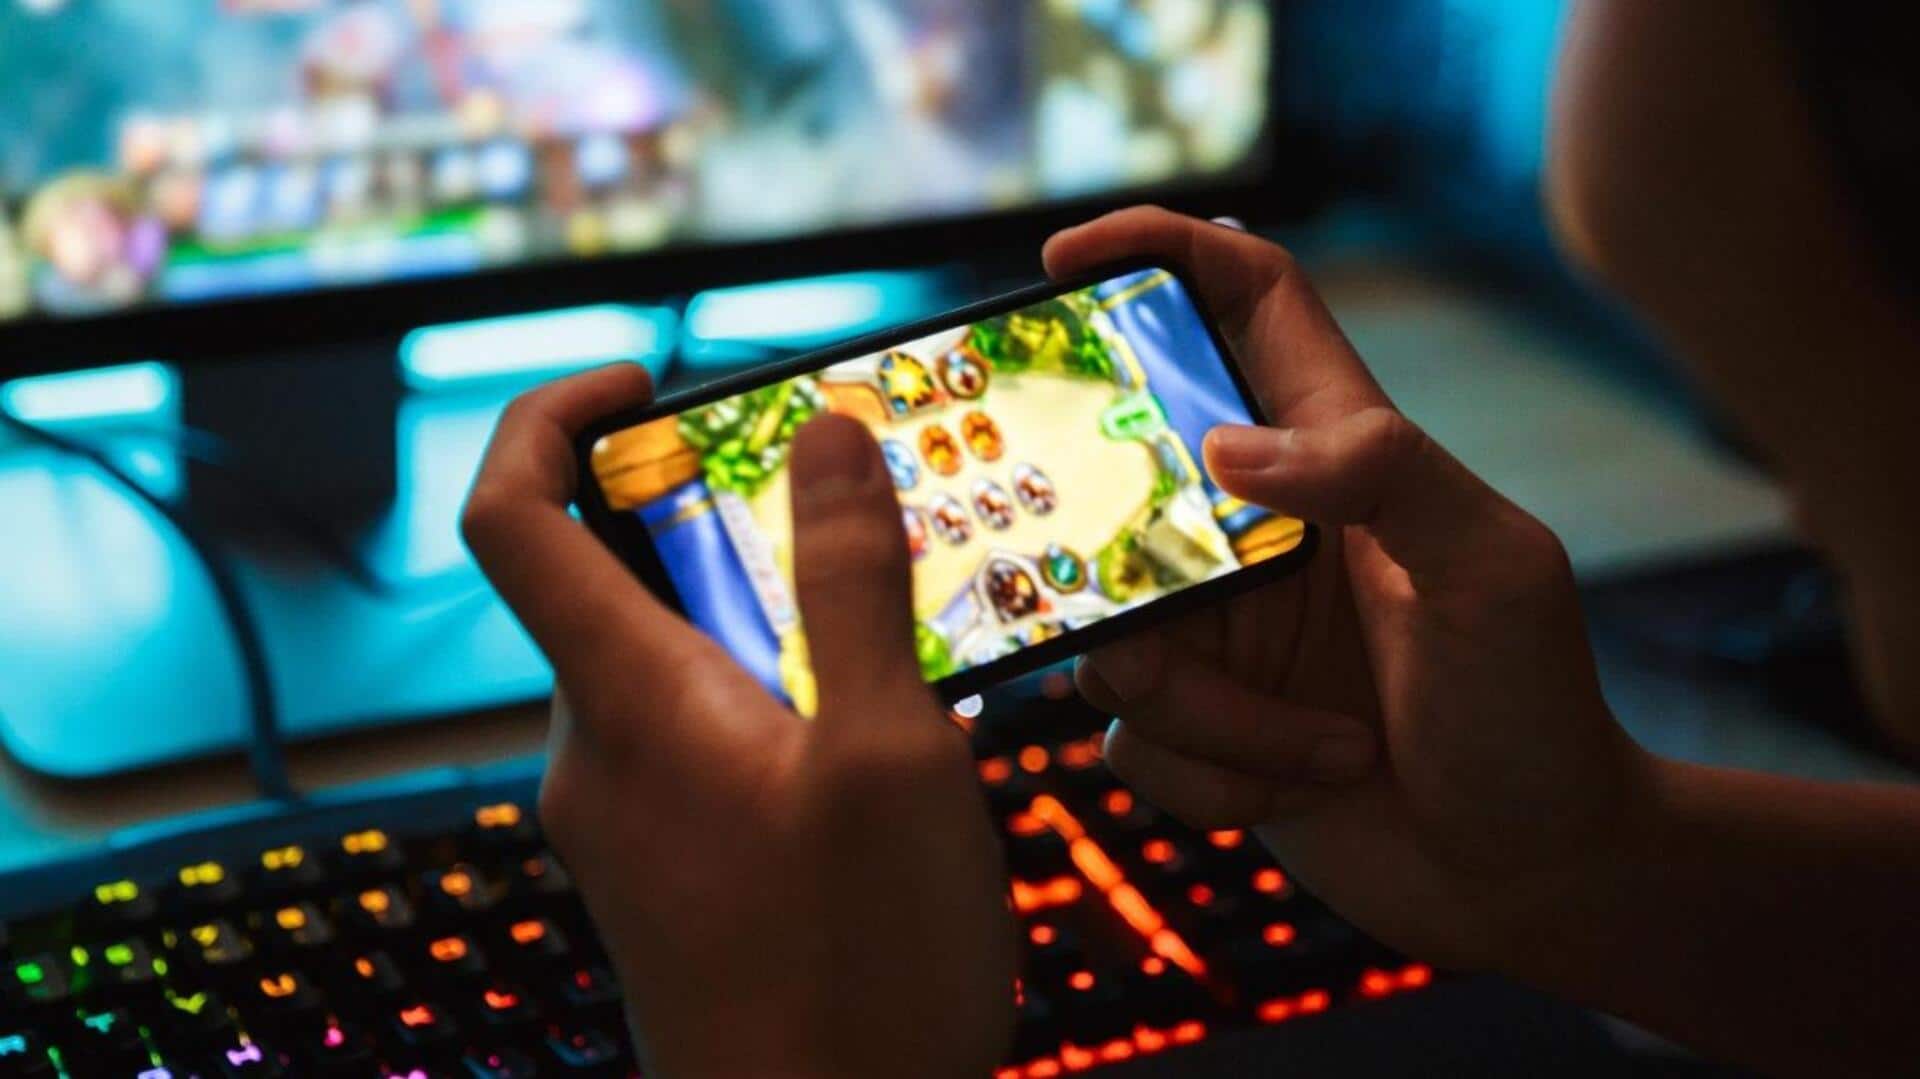 Over 100 online gaming firms under scrutiny for GST evasion